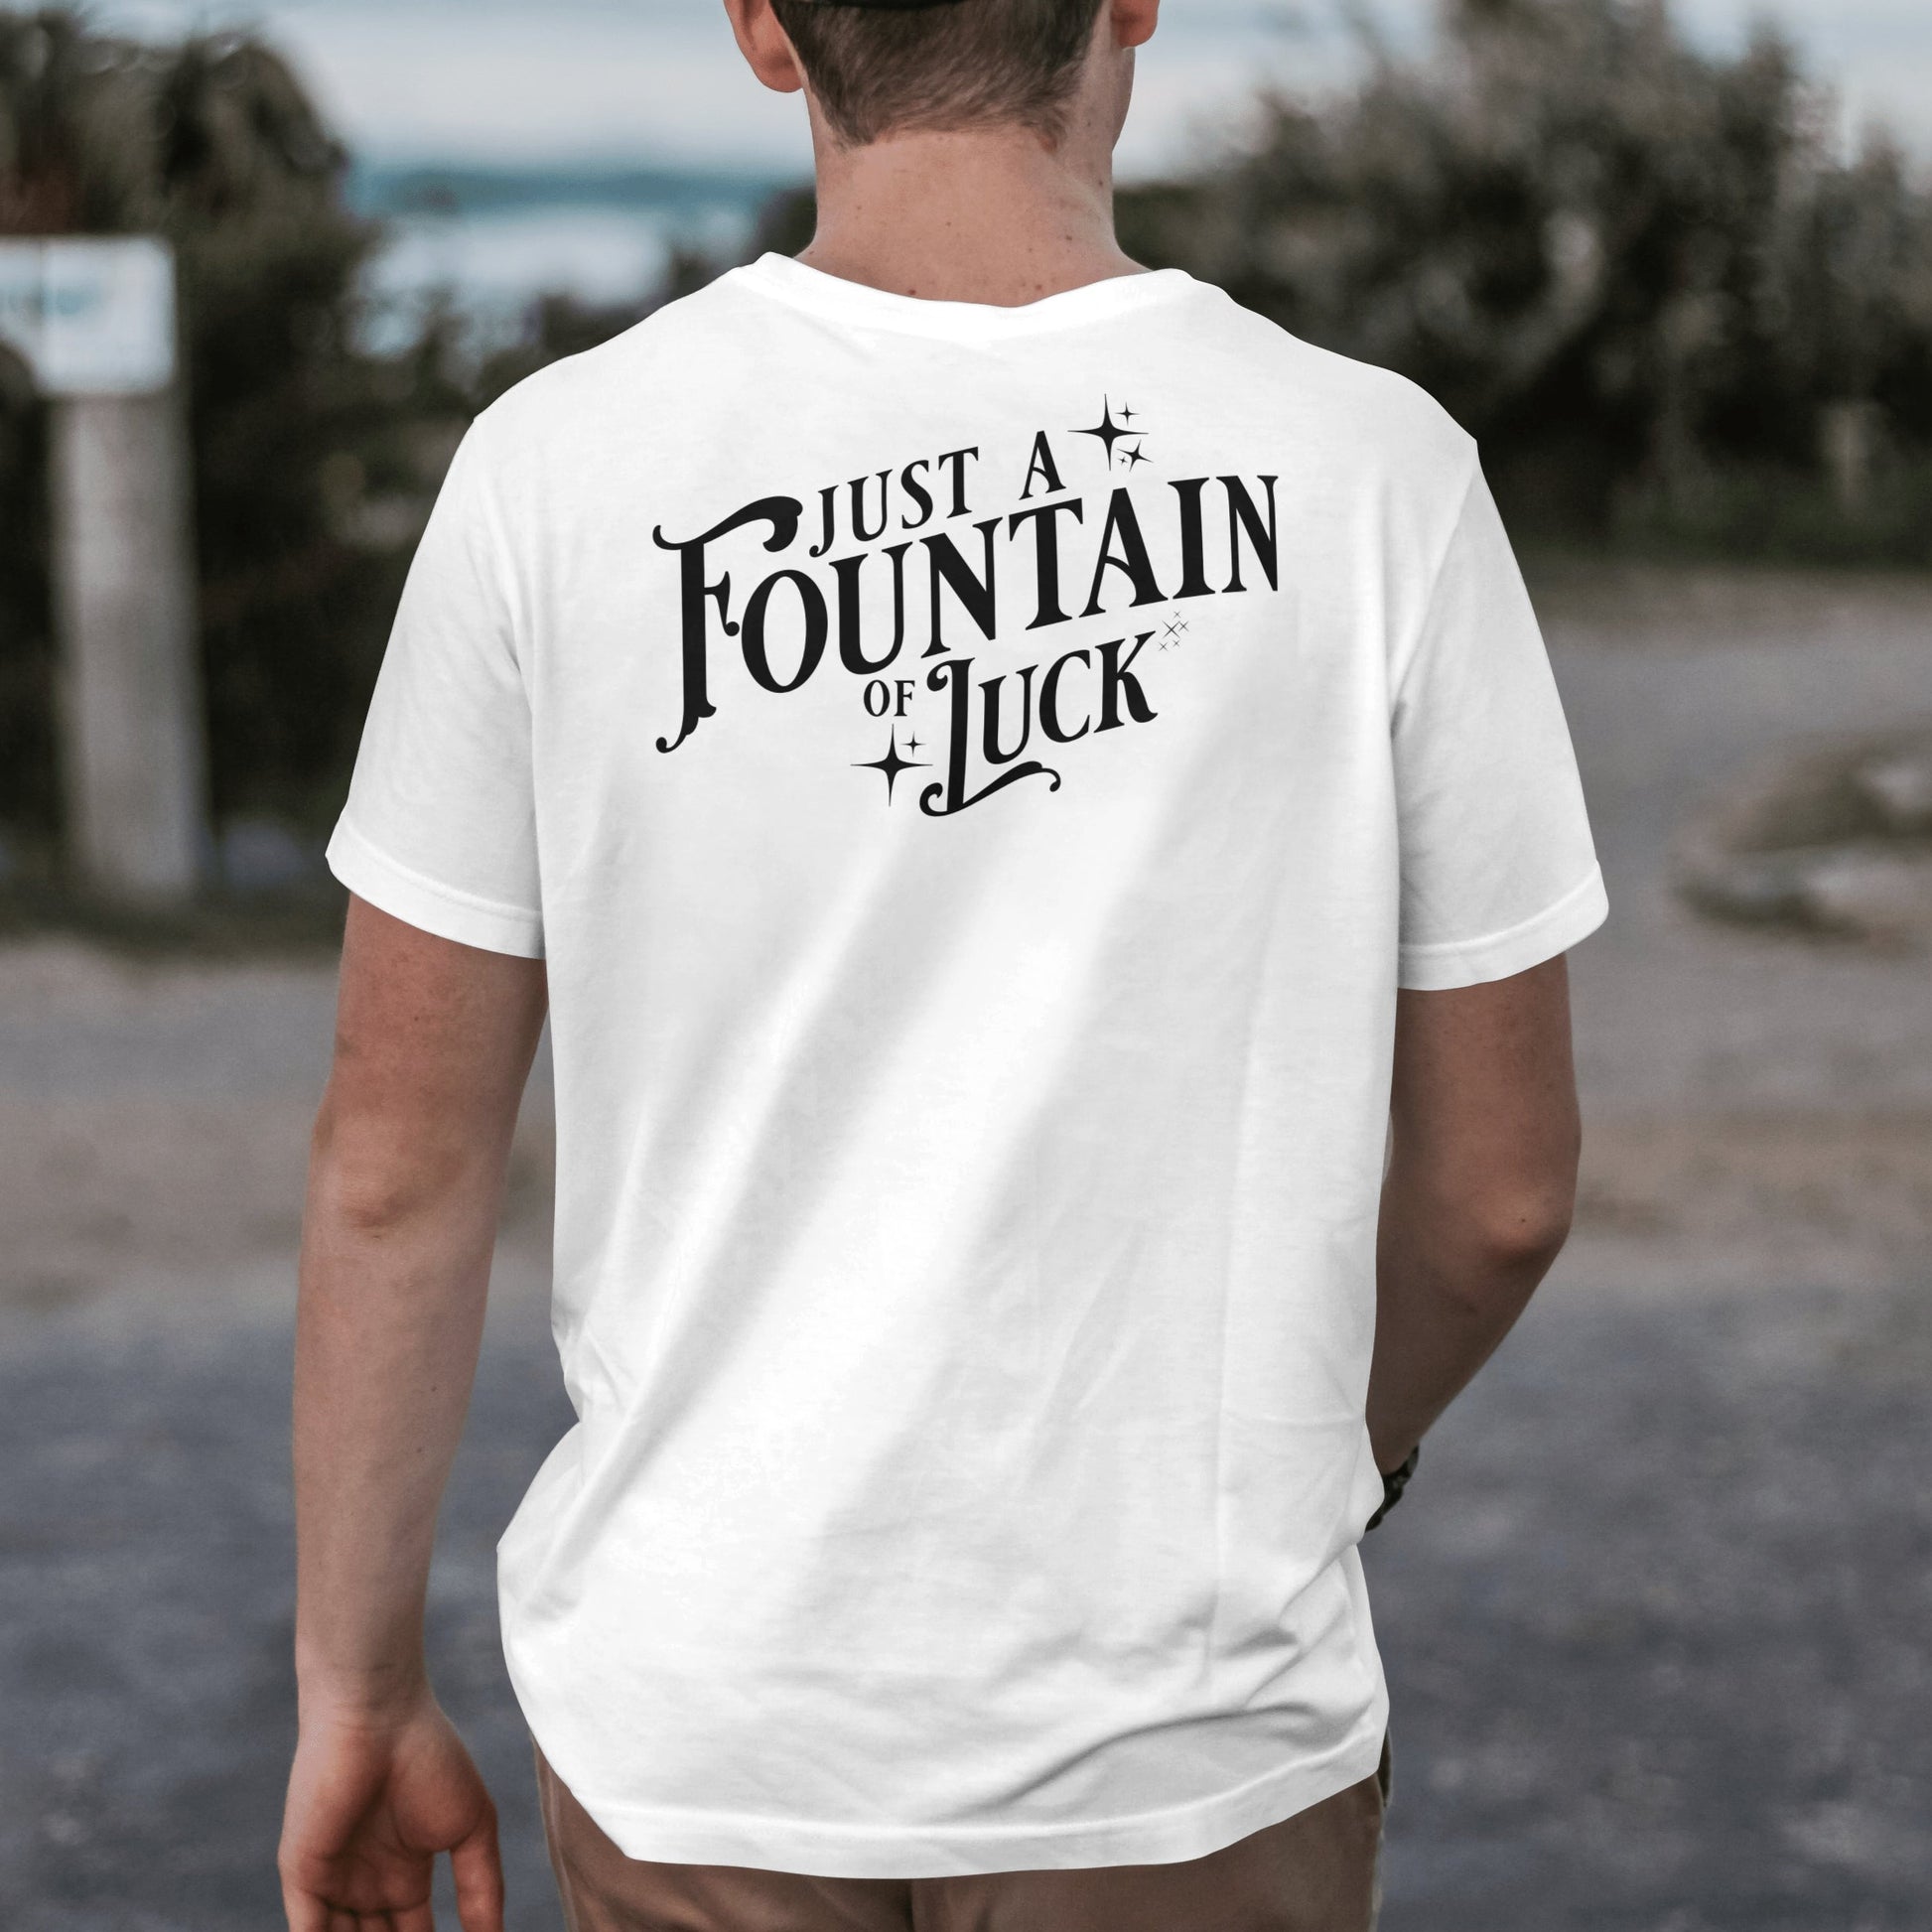 Just a fountain of luck slogan tee